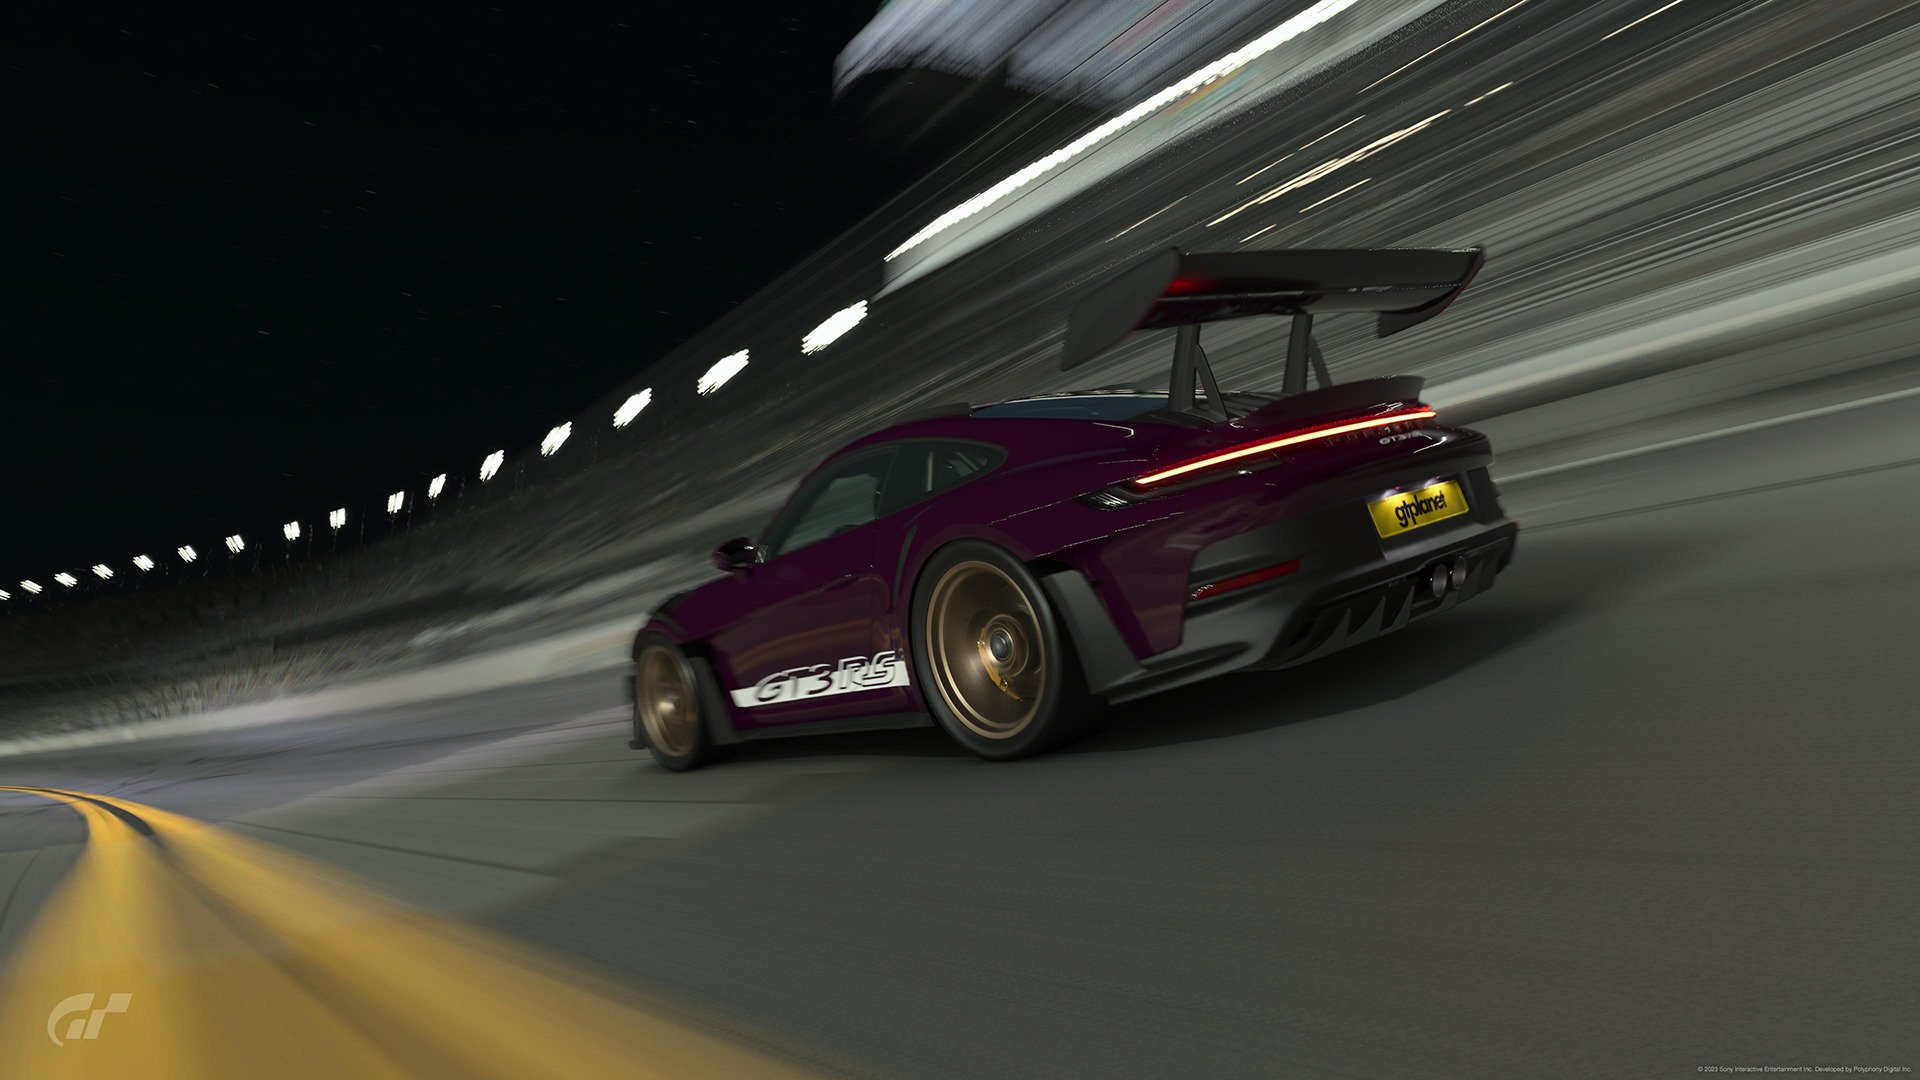 Gran Turismo 7 Update 1.41 Now Available: Fixes Custom Race Reward Glitch  and Other Issues – GTPlanet